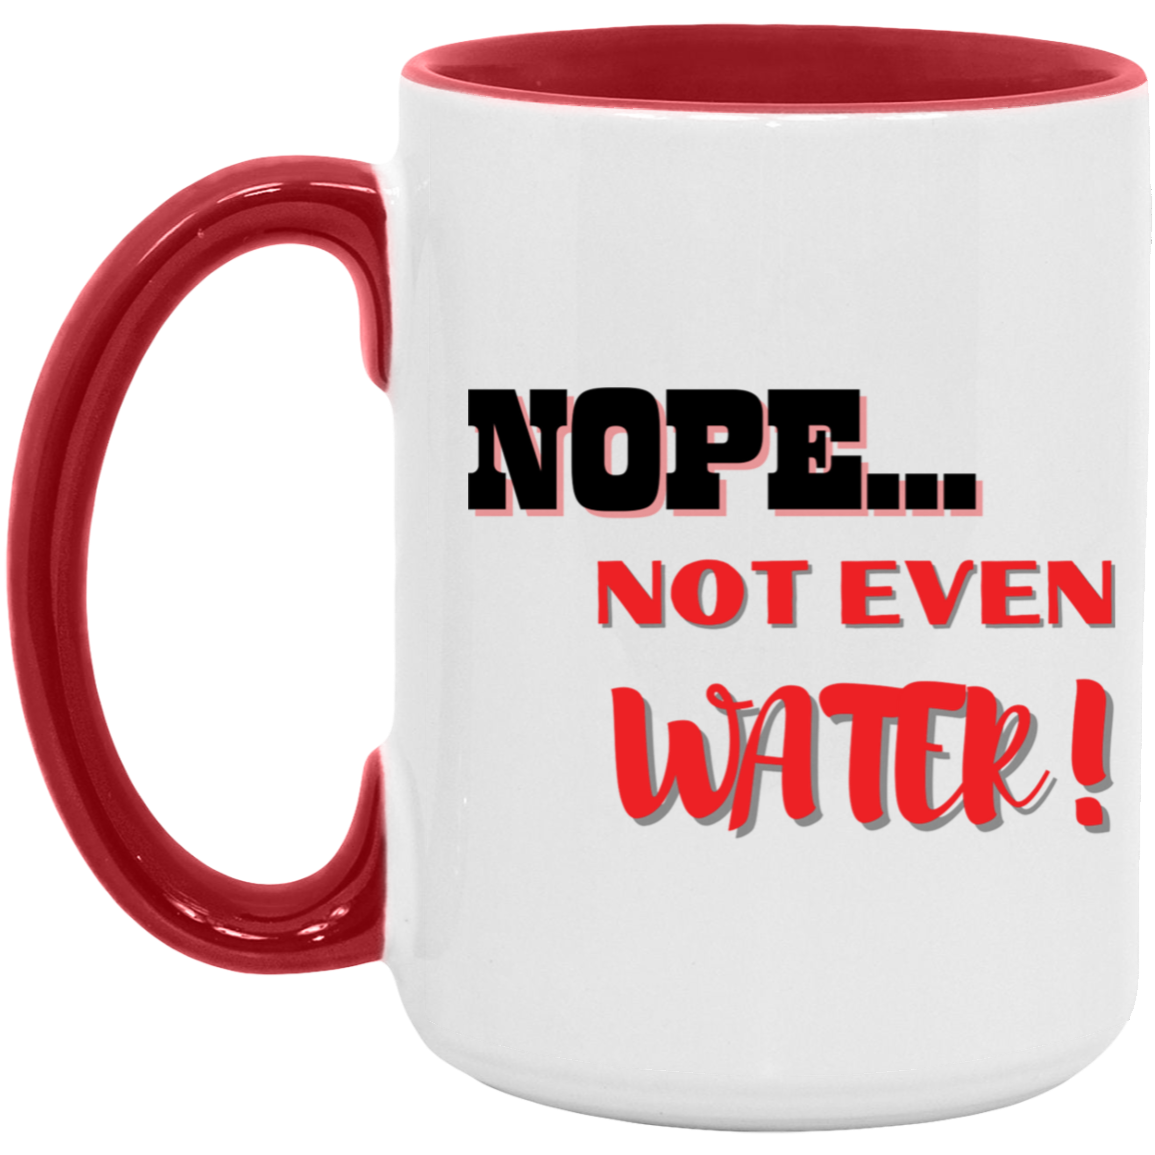 NOPE...NOT EVEN WATER! 15oz. Accent Mug (MORE COLORS)